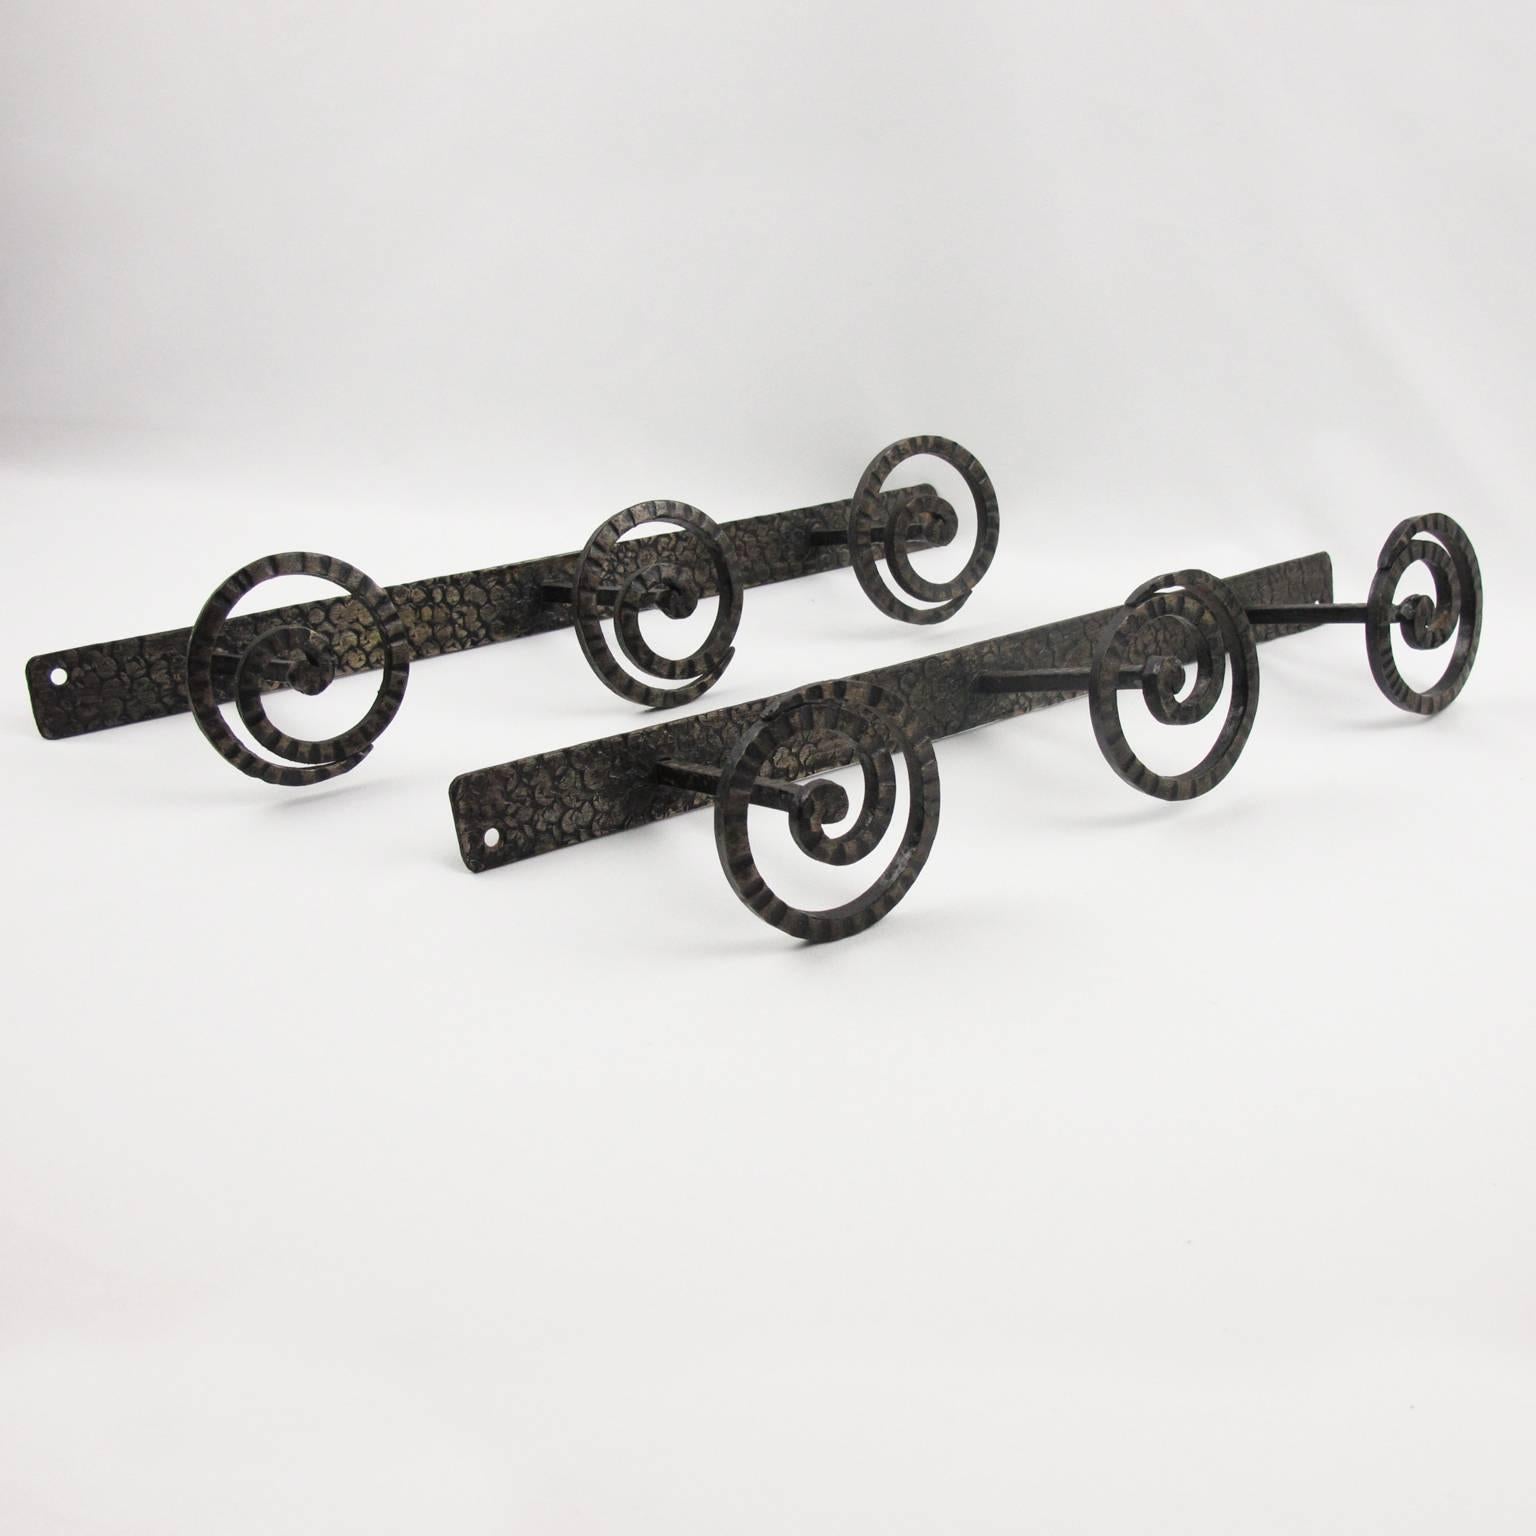 Elegant set of two French Art Nouveau wall mounted wrought iron coat racks. Original black patina with hammered textured finish. Three rounded coat hooks on each rack. 
This item is sold as a pair, however if you are interested in only one rack